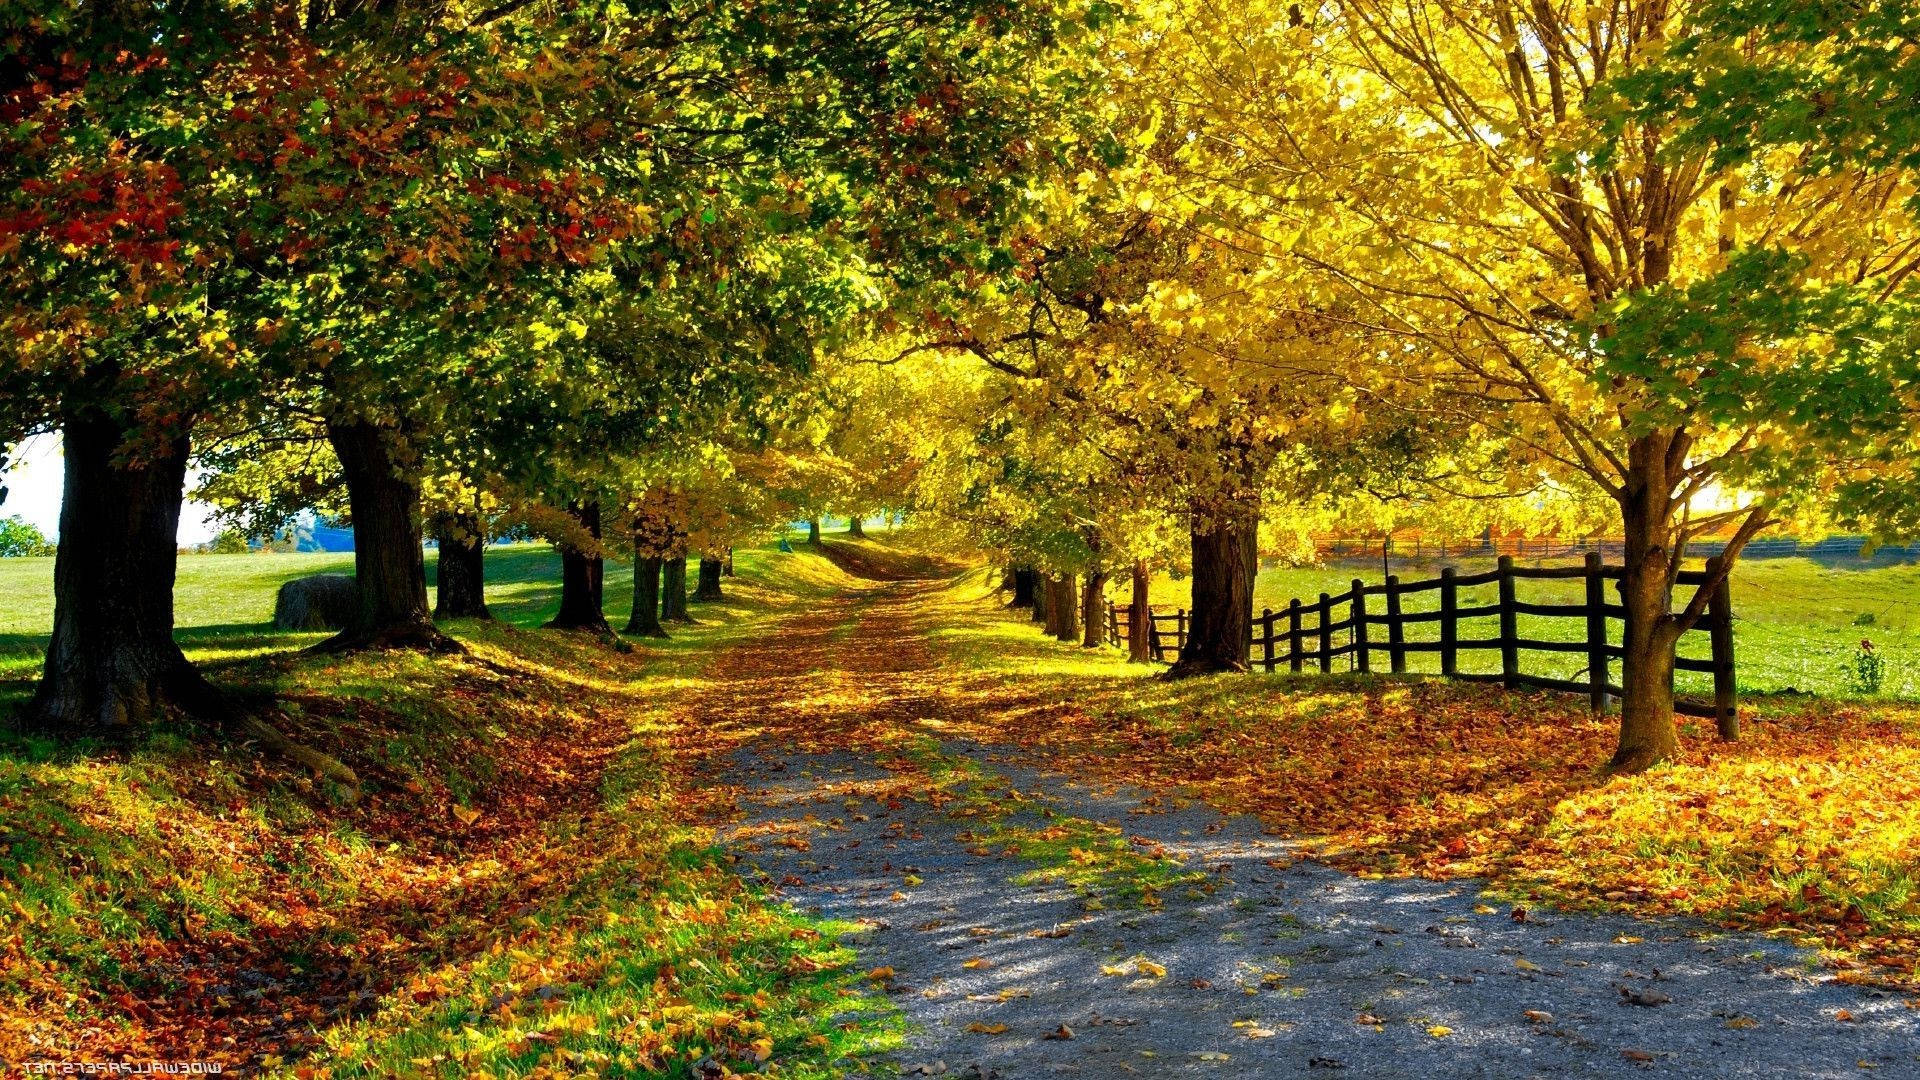 1920x1080 Hd Nature Autumn Road Background